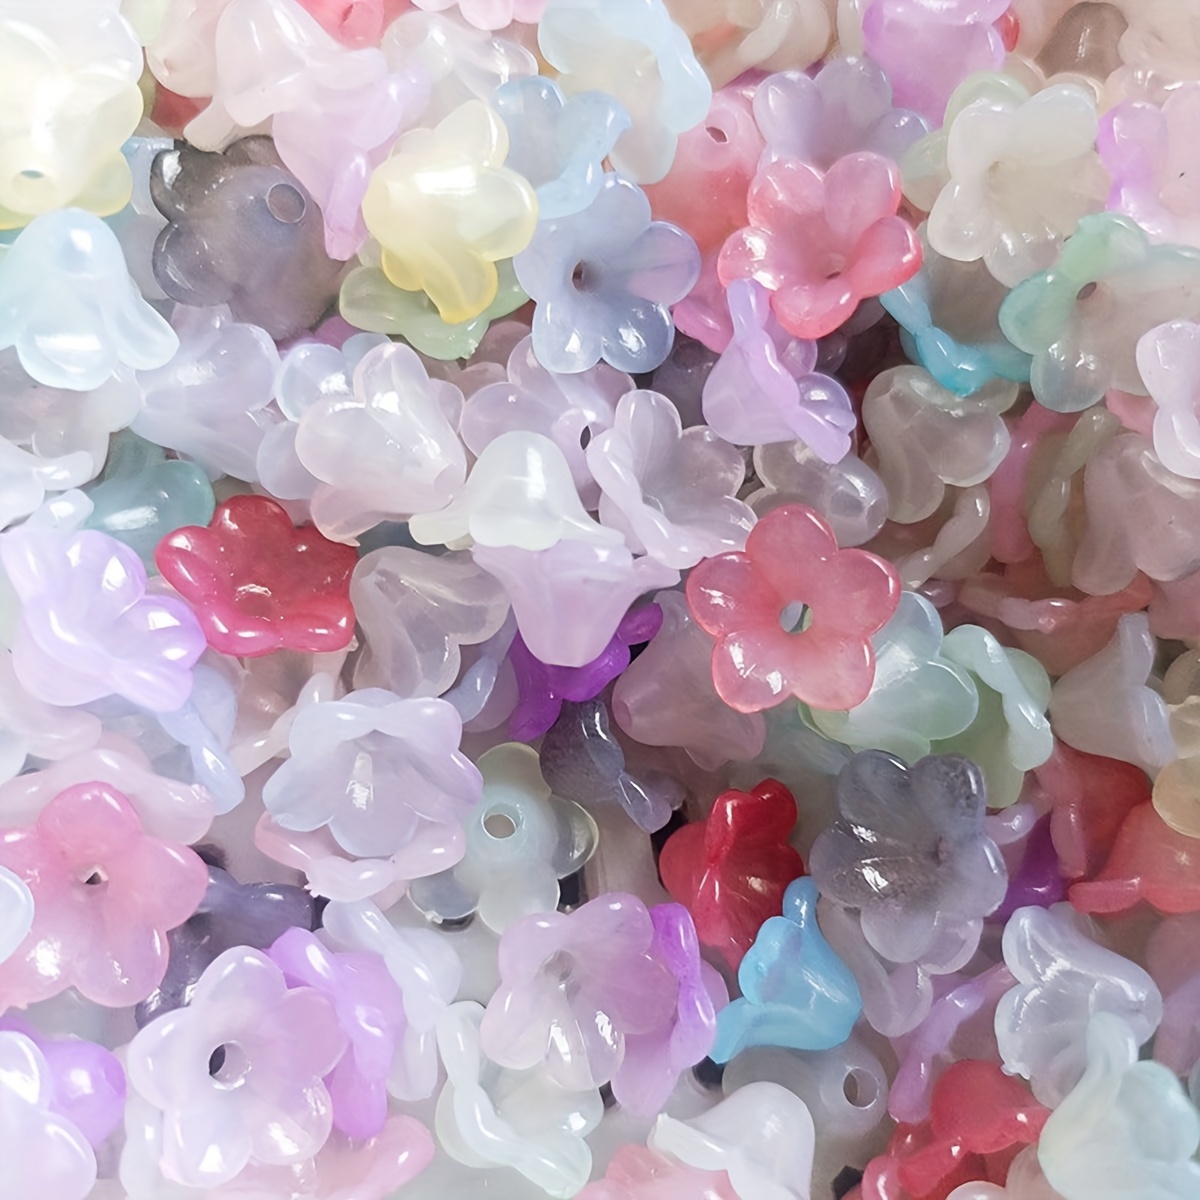 

50pcs/lot 11mm Bluebell Flower Mixed Color Acrylic Beads For Jewelry Making Diy Special Elegant Bracelet Necklace Earrings Handmade Craft Supplies